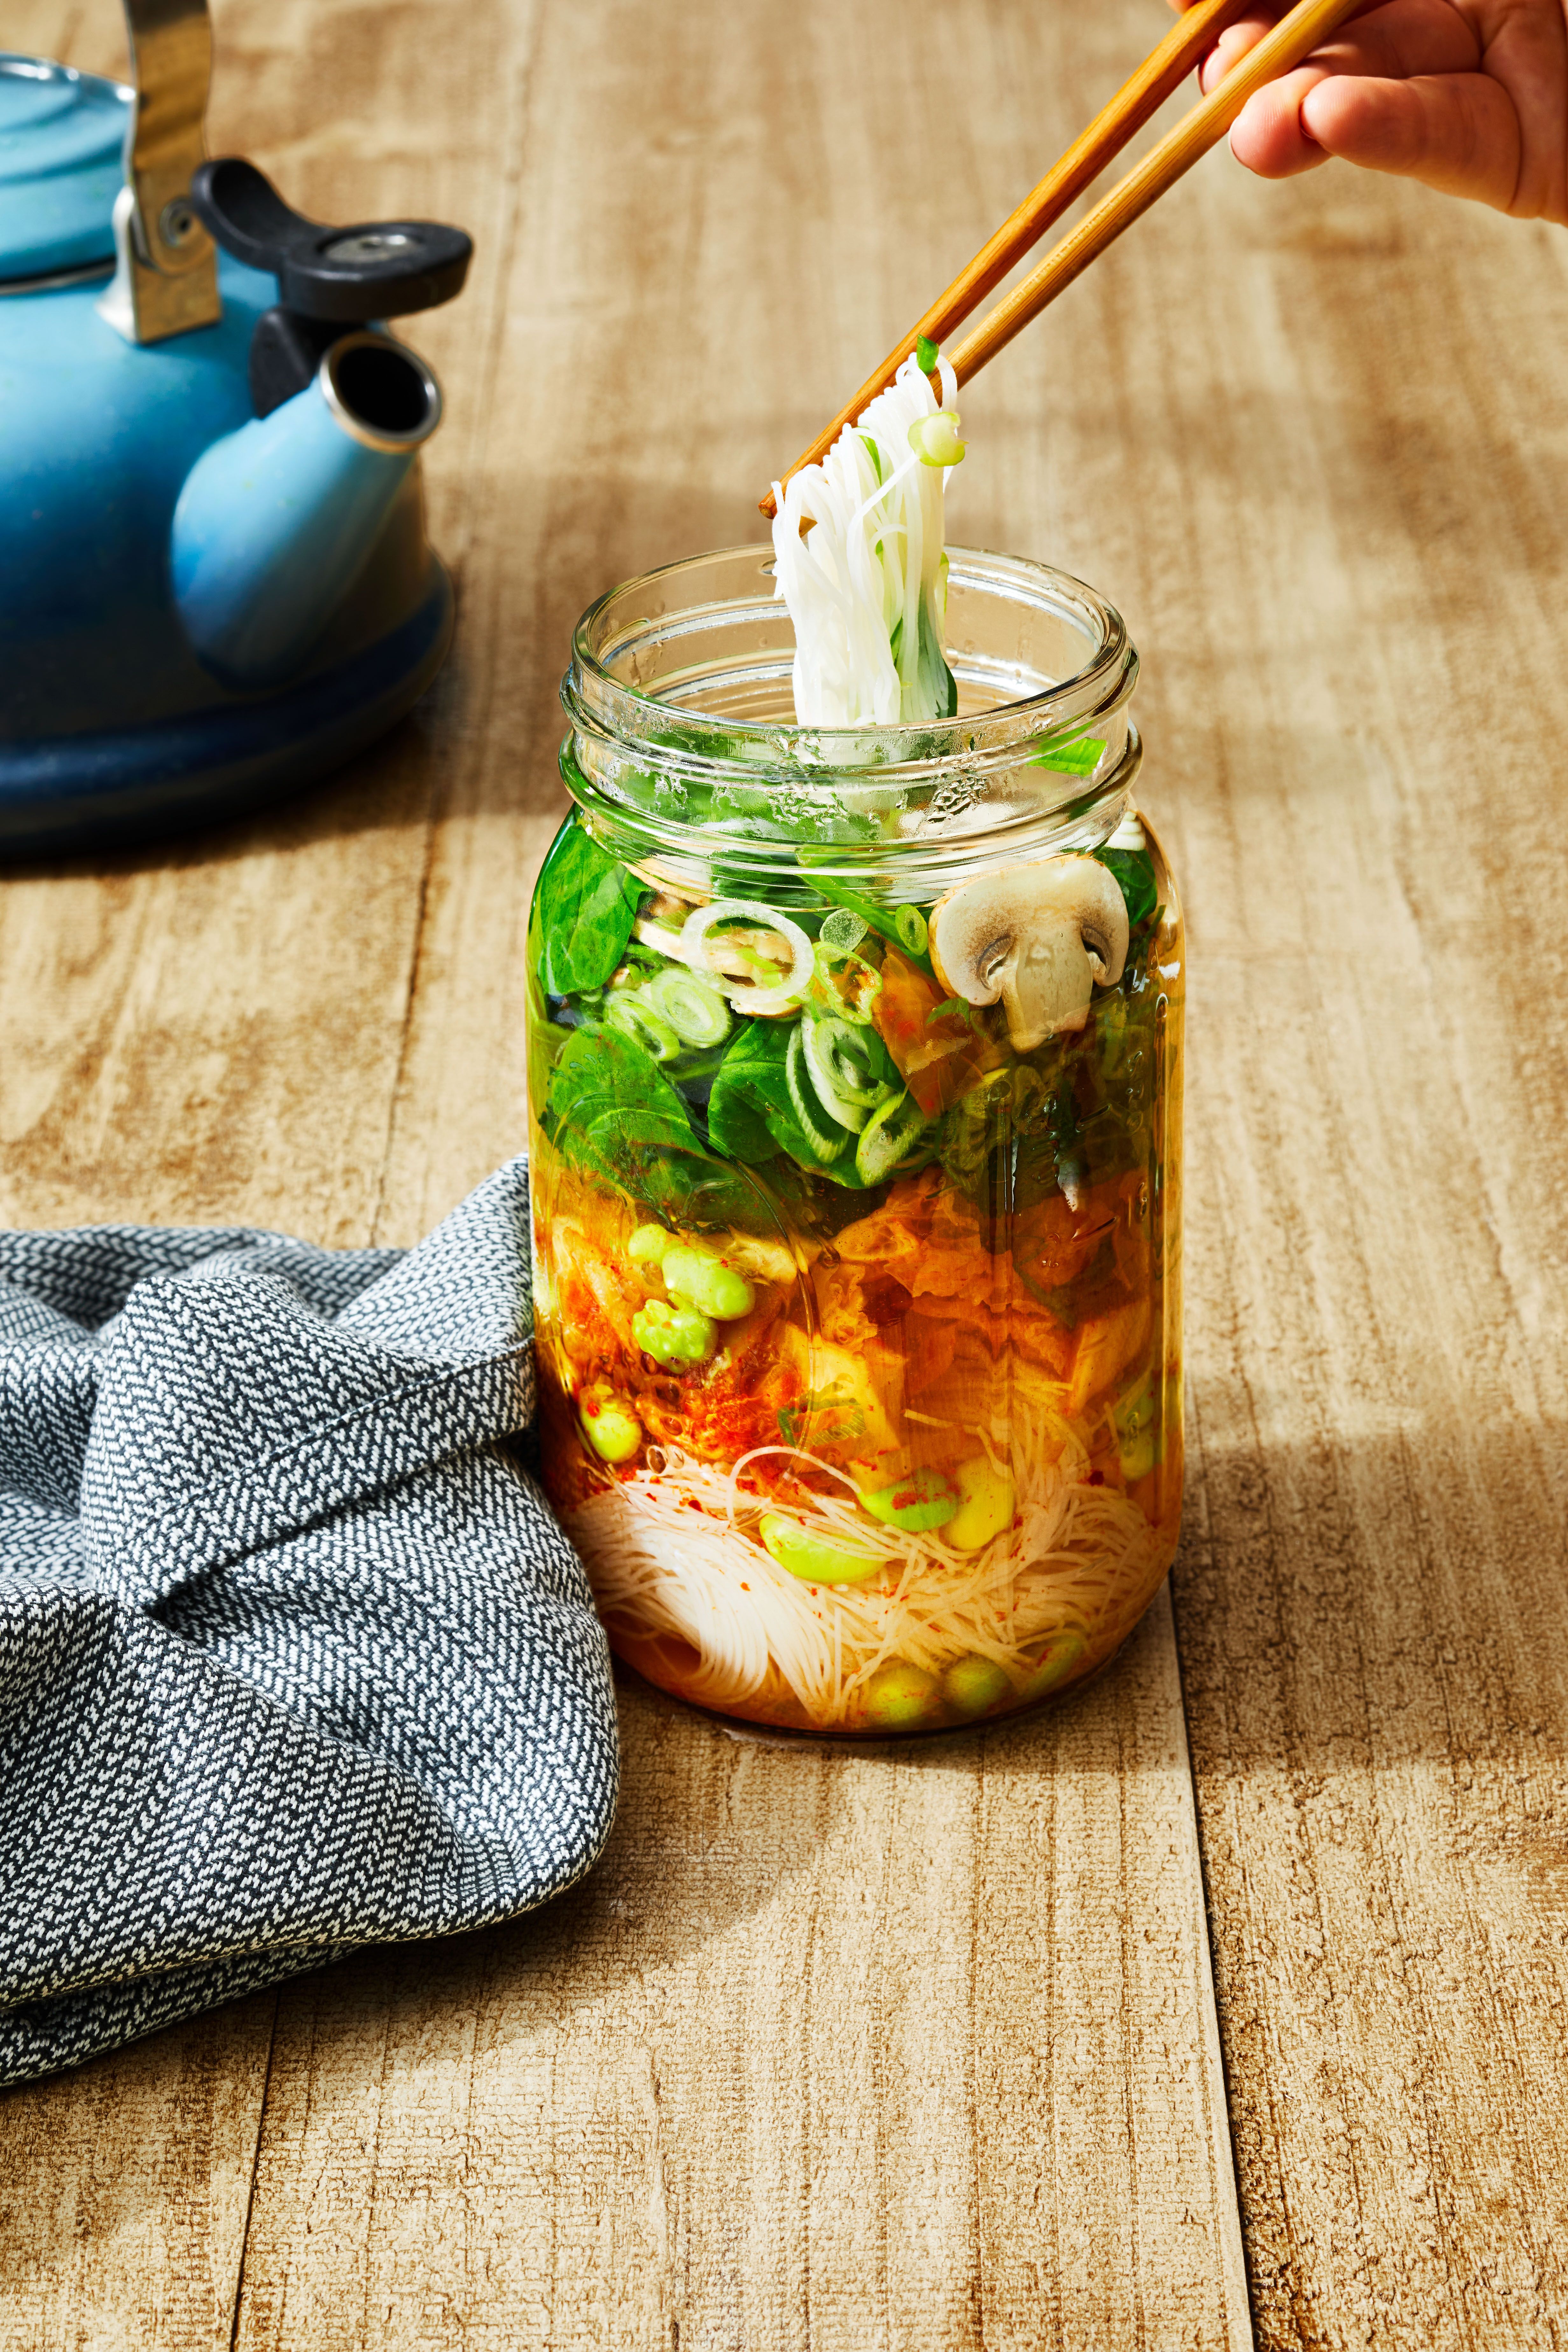 70 Healthy Lunch Ideas That Are Easy to Pack for School and Work